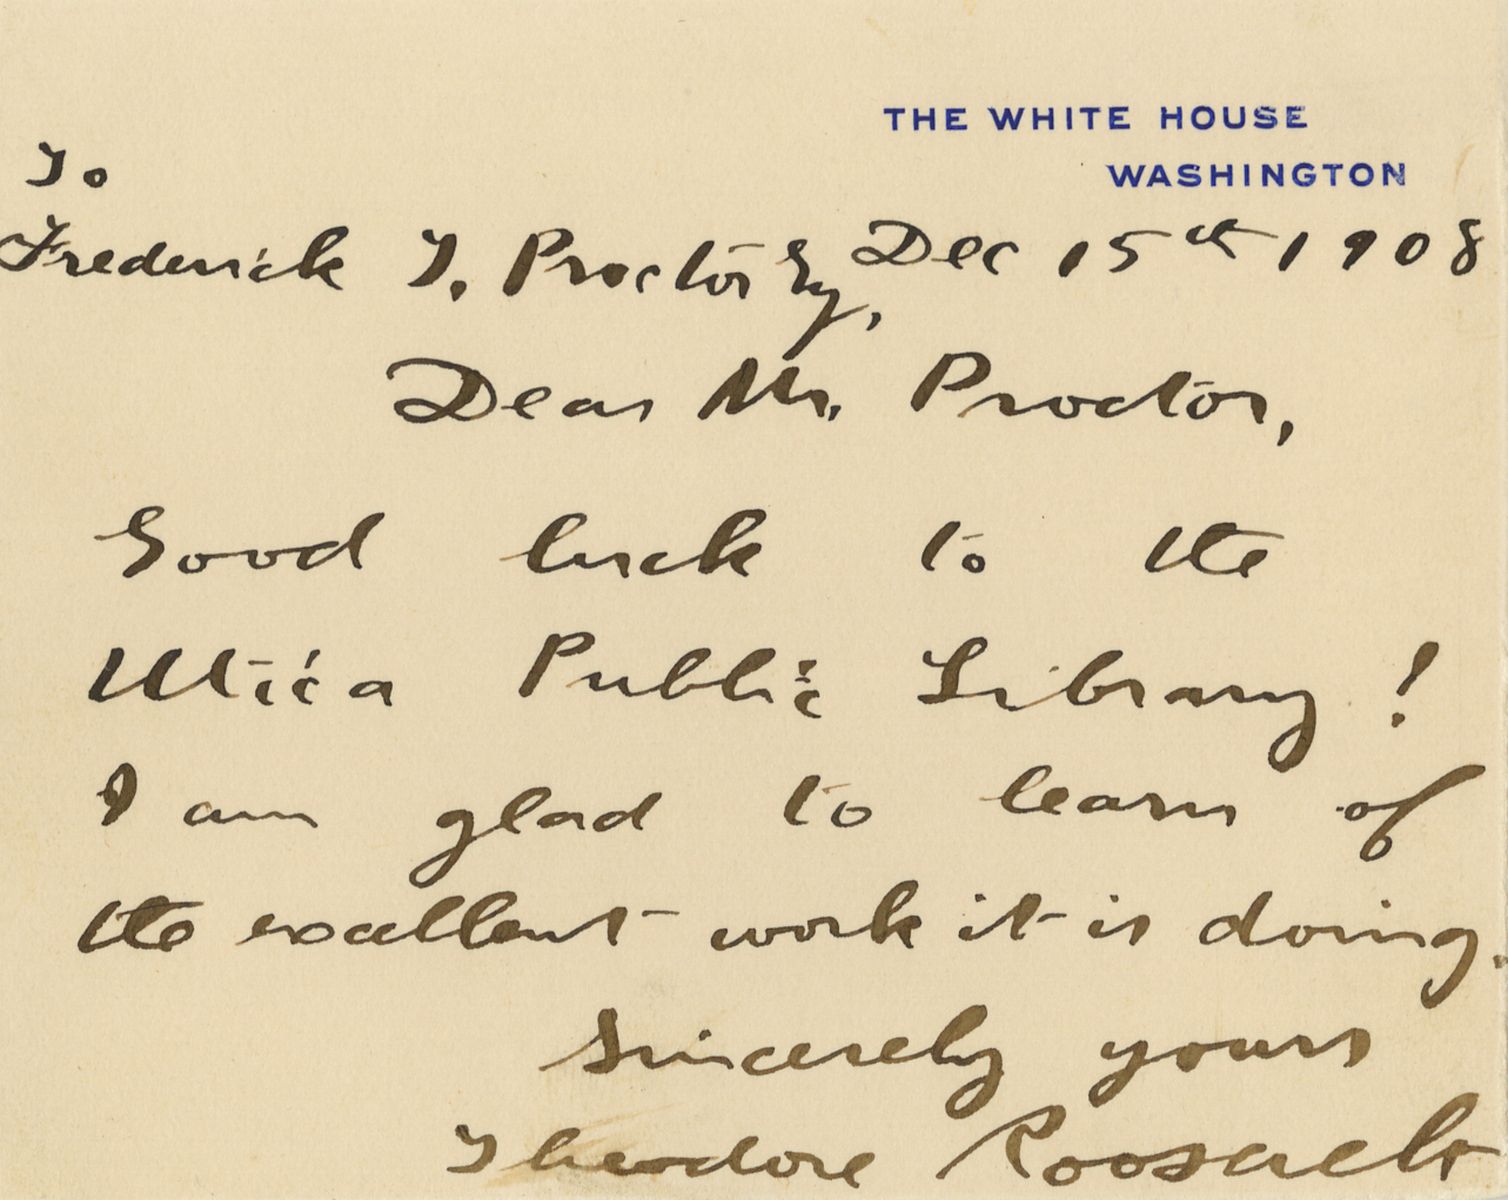 Theodore Roosevelt Pens Congratulatory Letter on White House Card: Lauds Utica Public Library